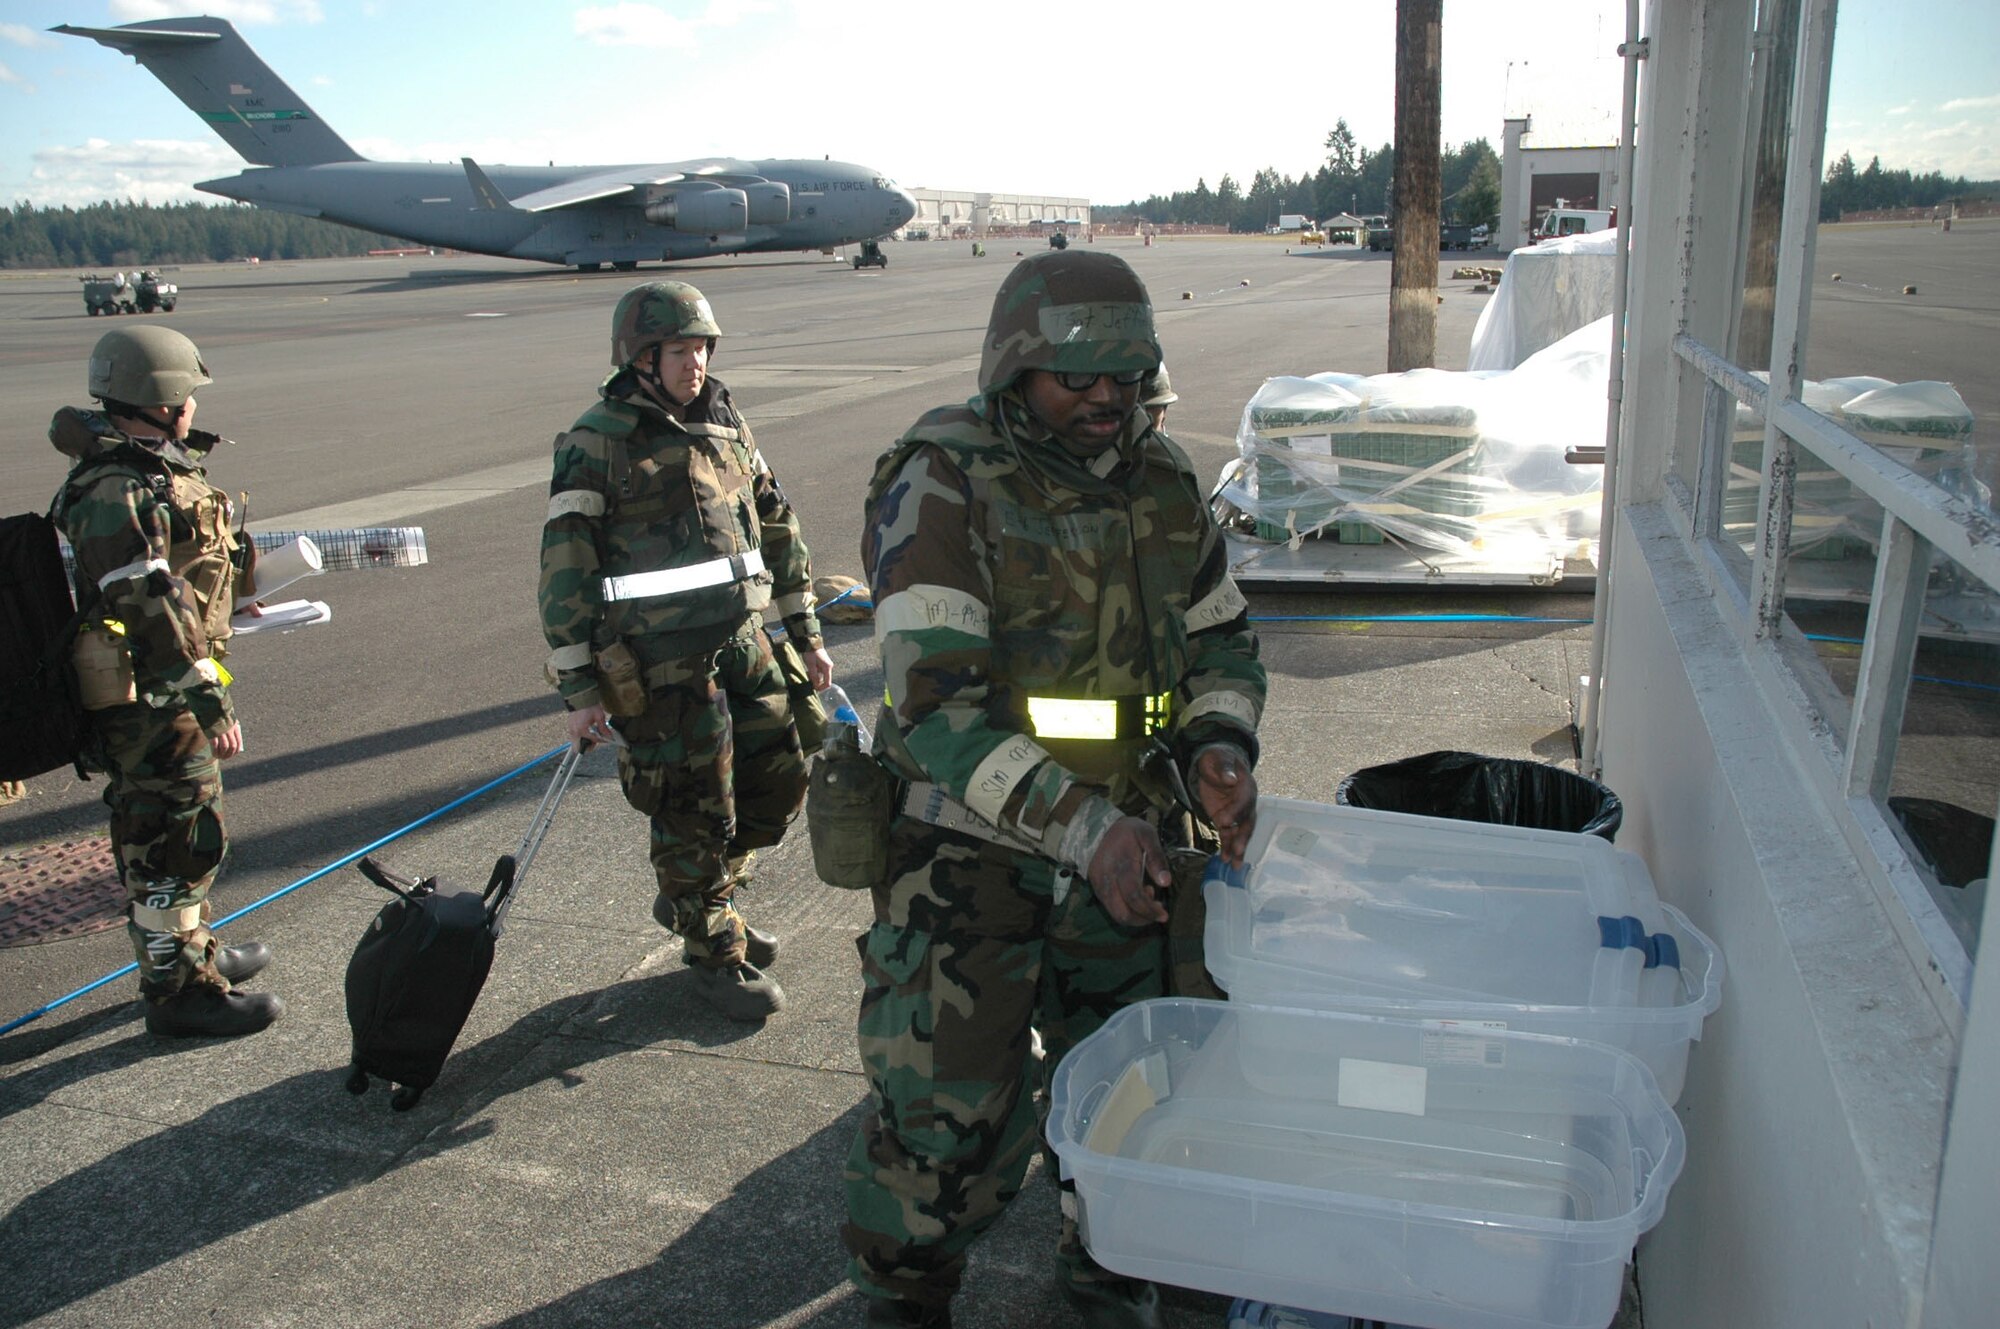 Reservists participating in the February mobility exercise at McChord Air Force Base, Wash., decontaminate at a simulated decon station before entering their work place. (U.S. Air Force photo/Staff Sgt. Grant Saylor)